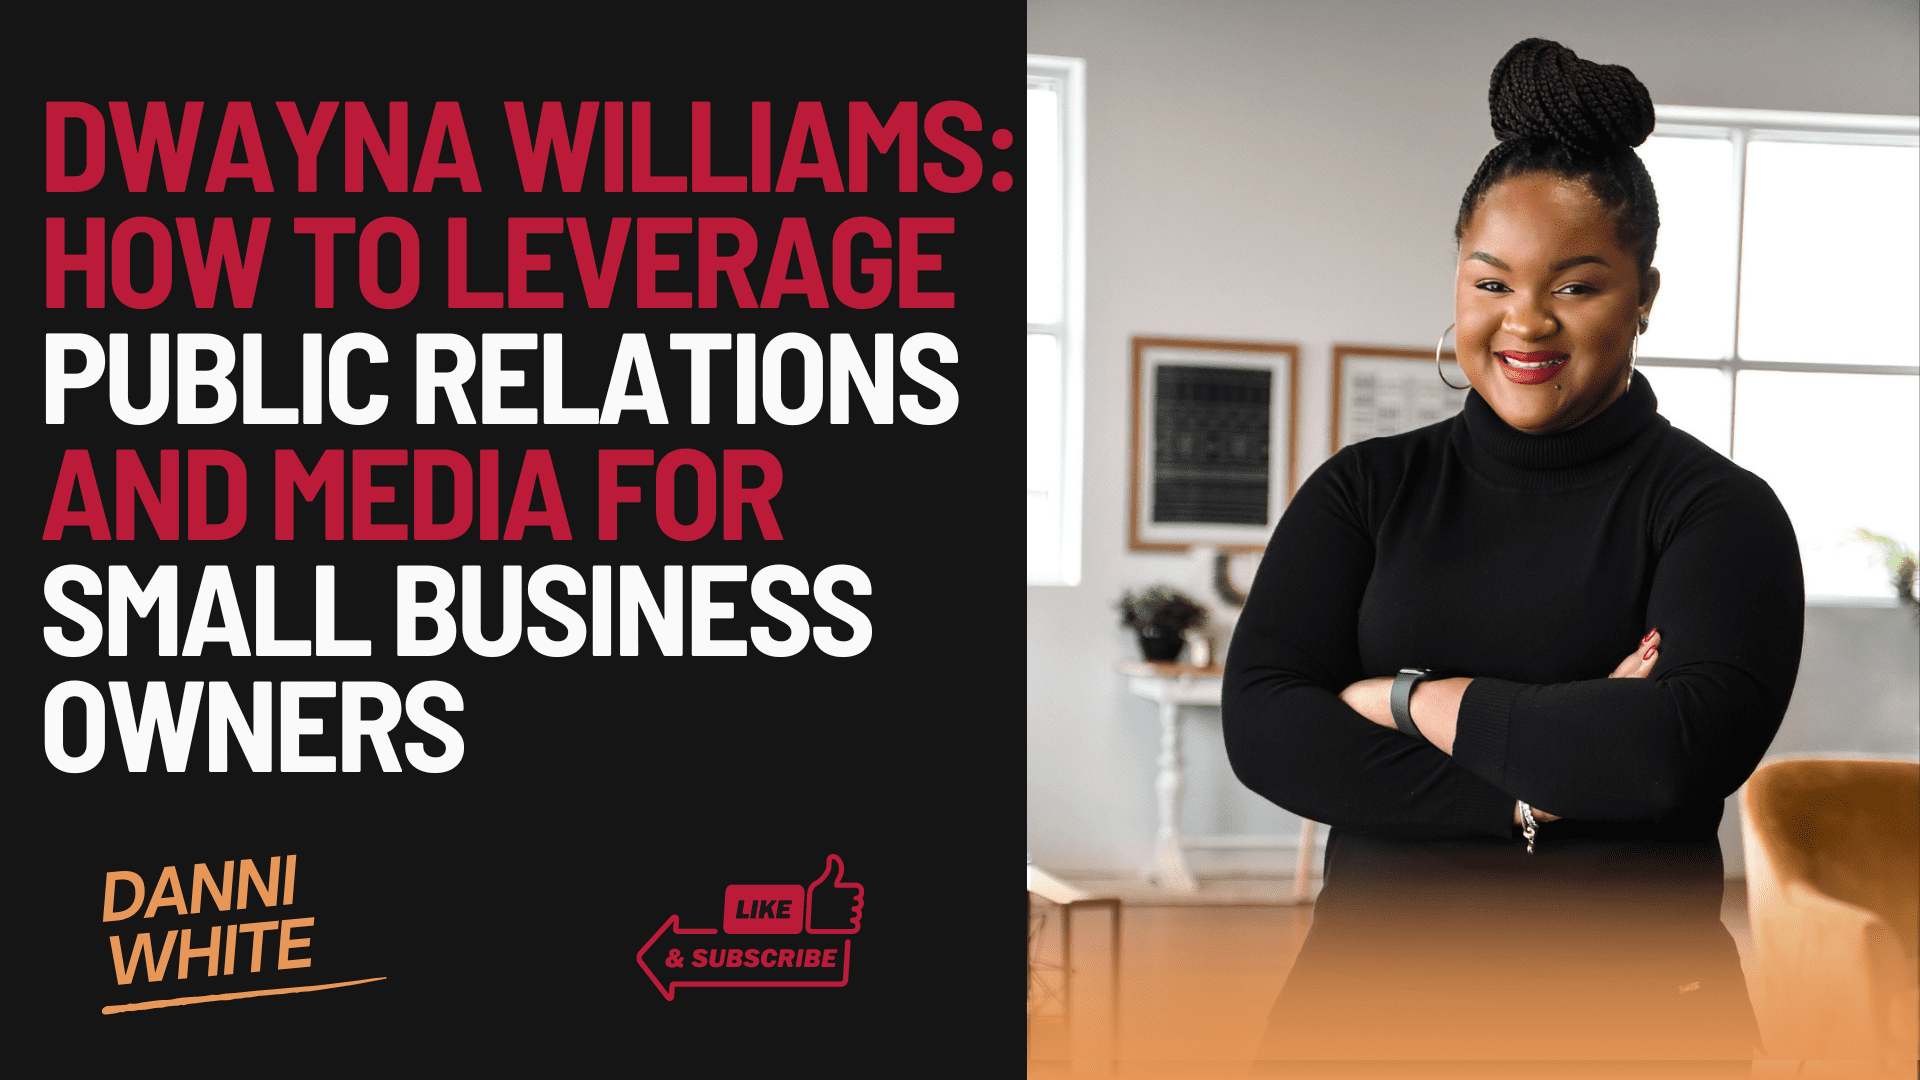 Dwayna Williams: How to Leverage Public Relations and Media for Small Business Owners